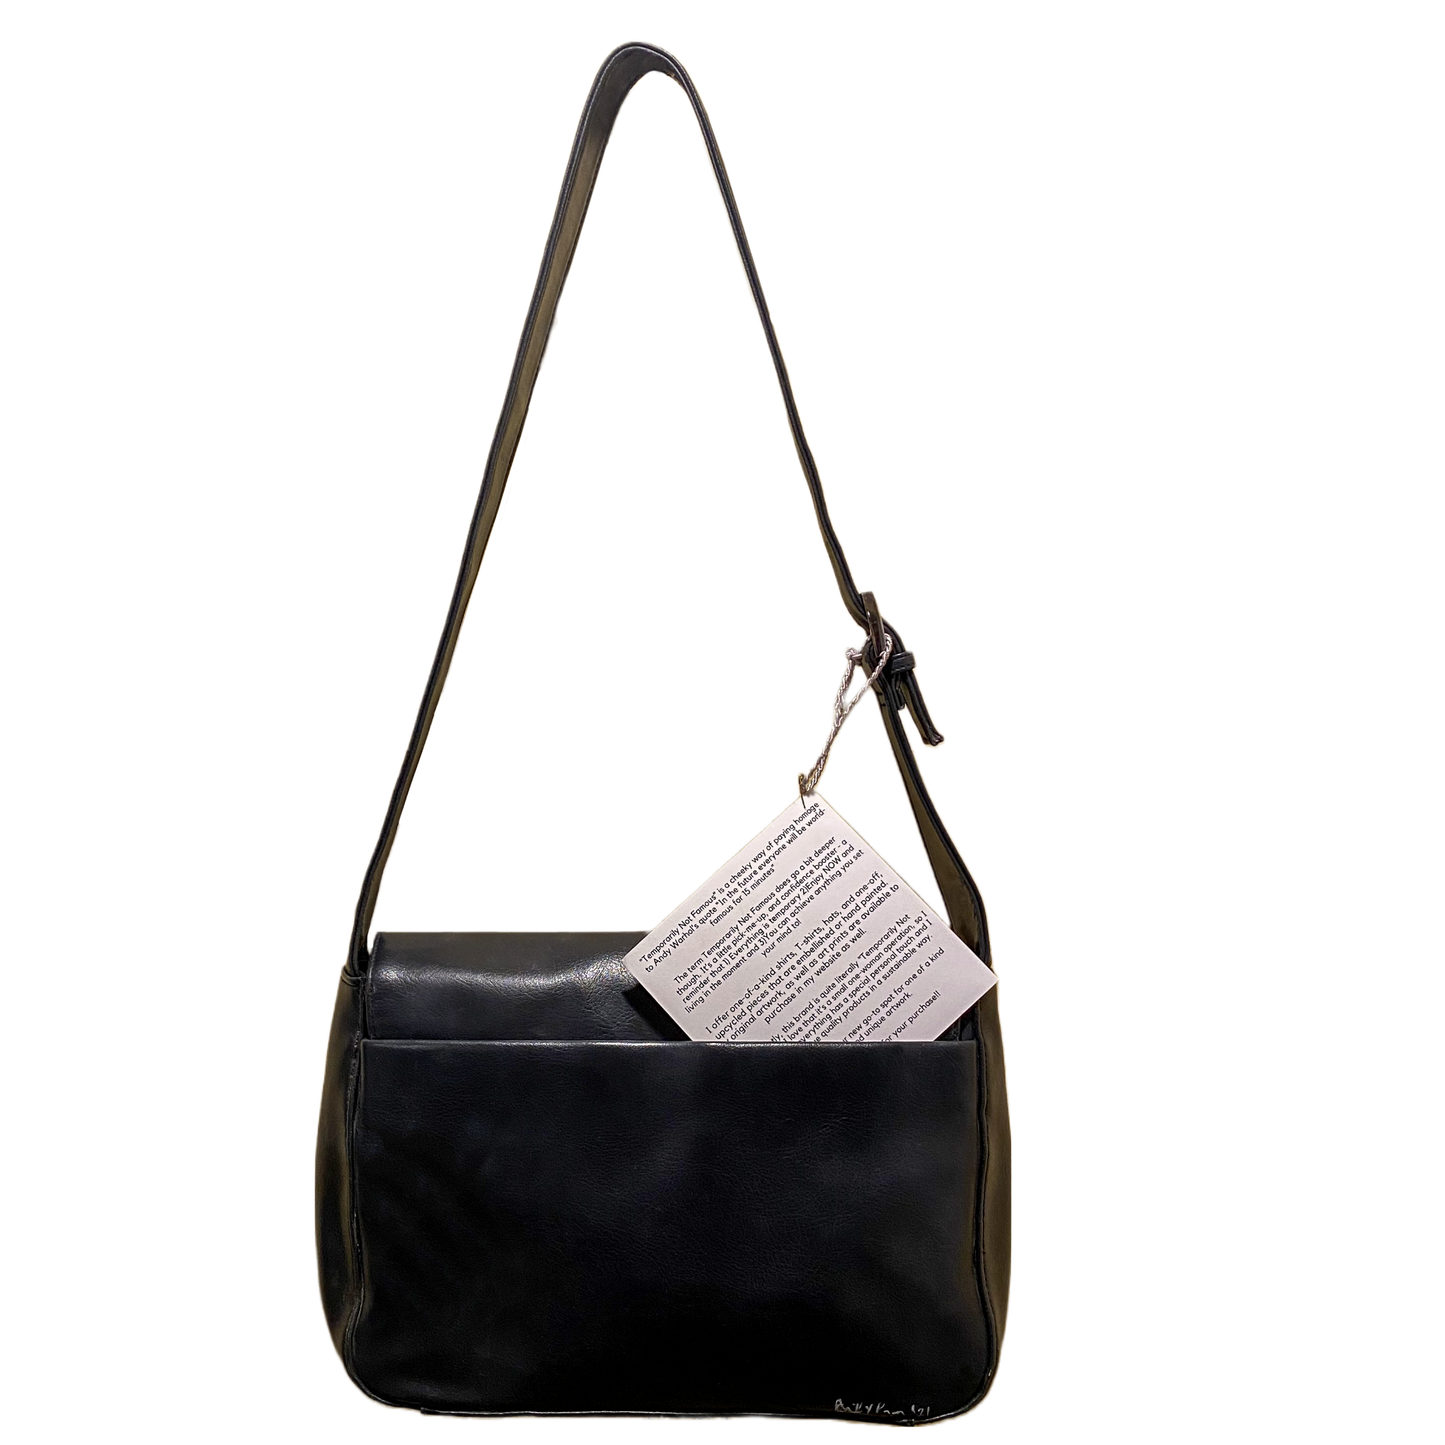 "Olivia" Black Leather Shoulder Bag Hand Painted - by Temporarily Not Famous